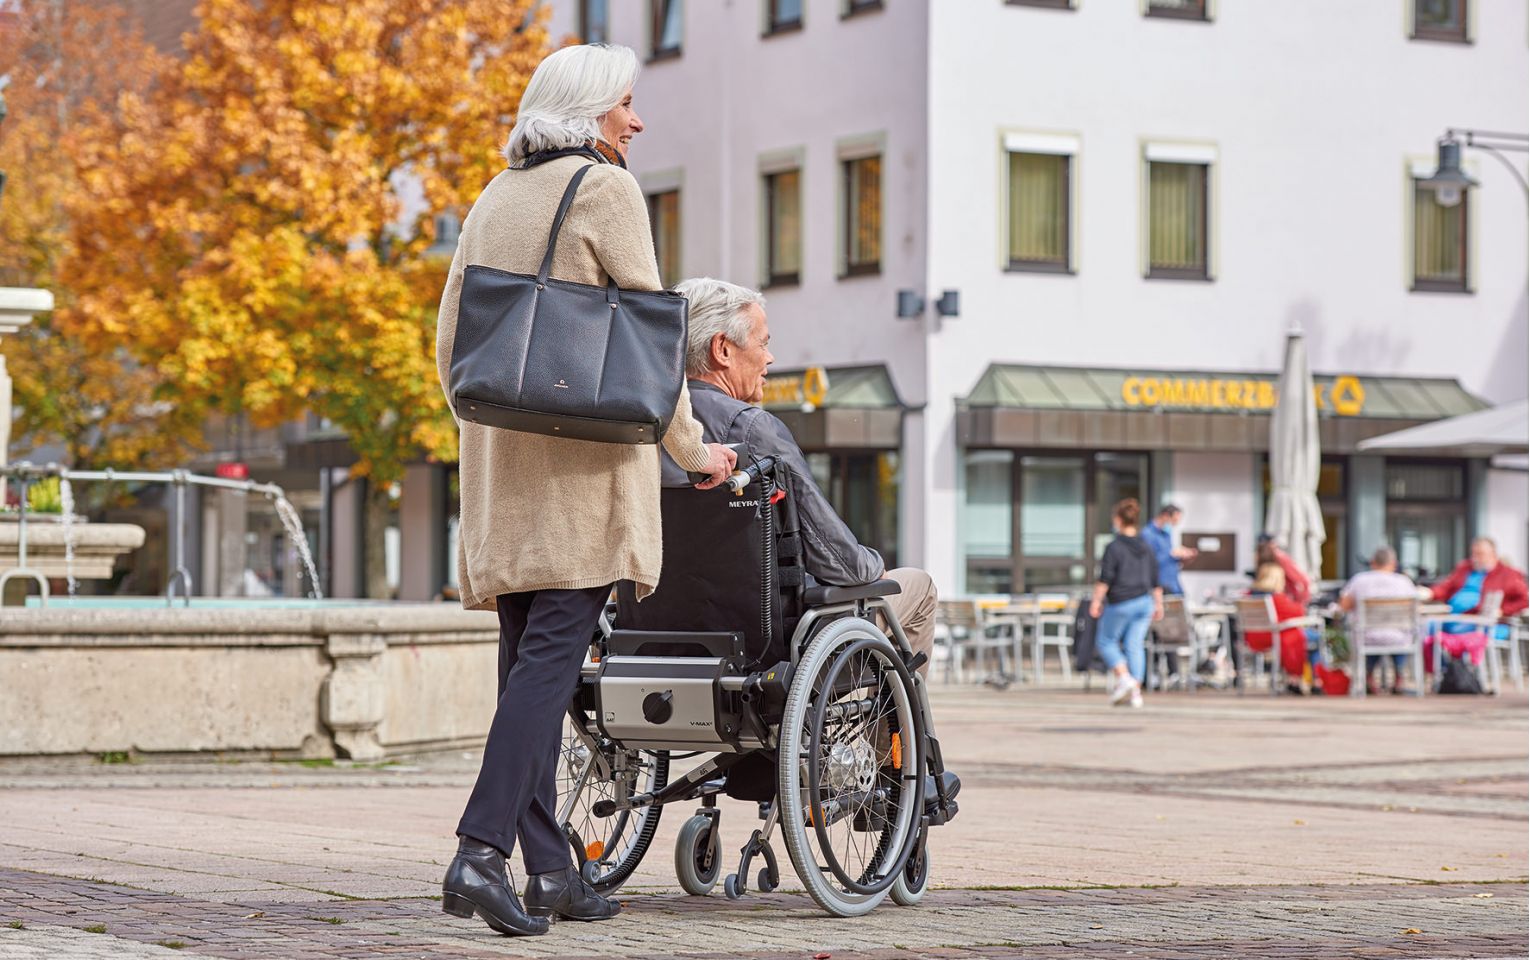 The picture shows an elderly woman pushing an elderly man in his wheelchair through a city center with cobblestones. The wheelchair is fitted with a V-MAX² pushing and braking aid from AAT Alber Antriebstechnik, which supports the woman when pushing and braking the wheelchair and thus offers greater safety.